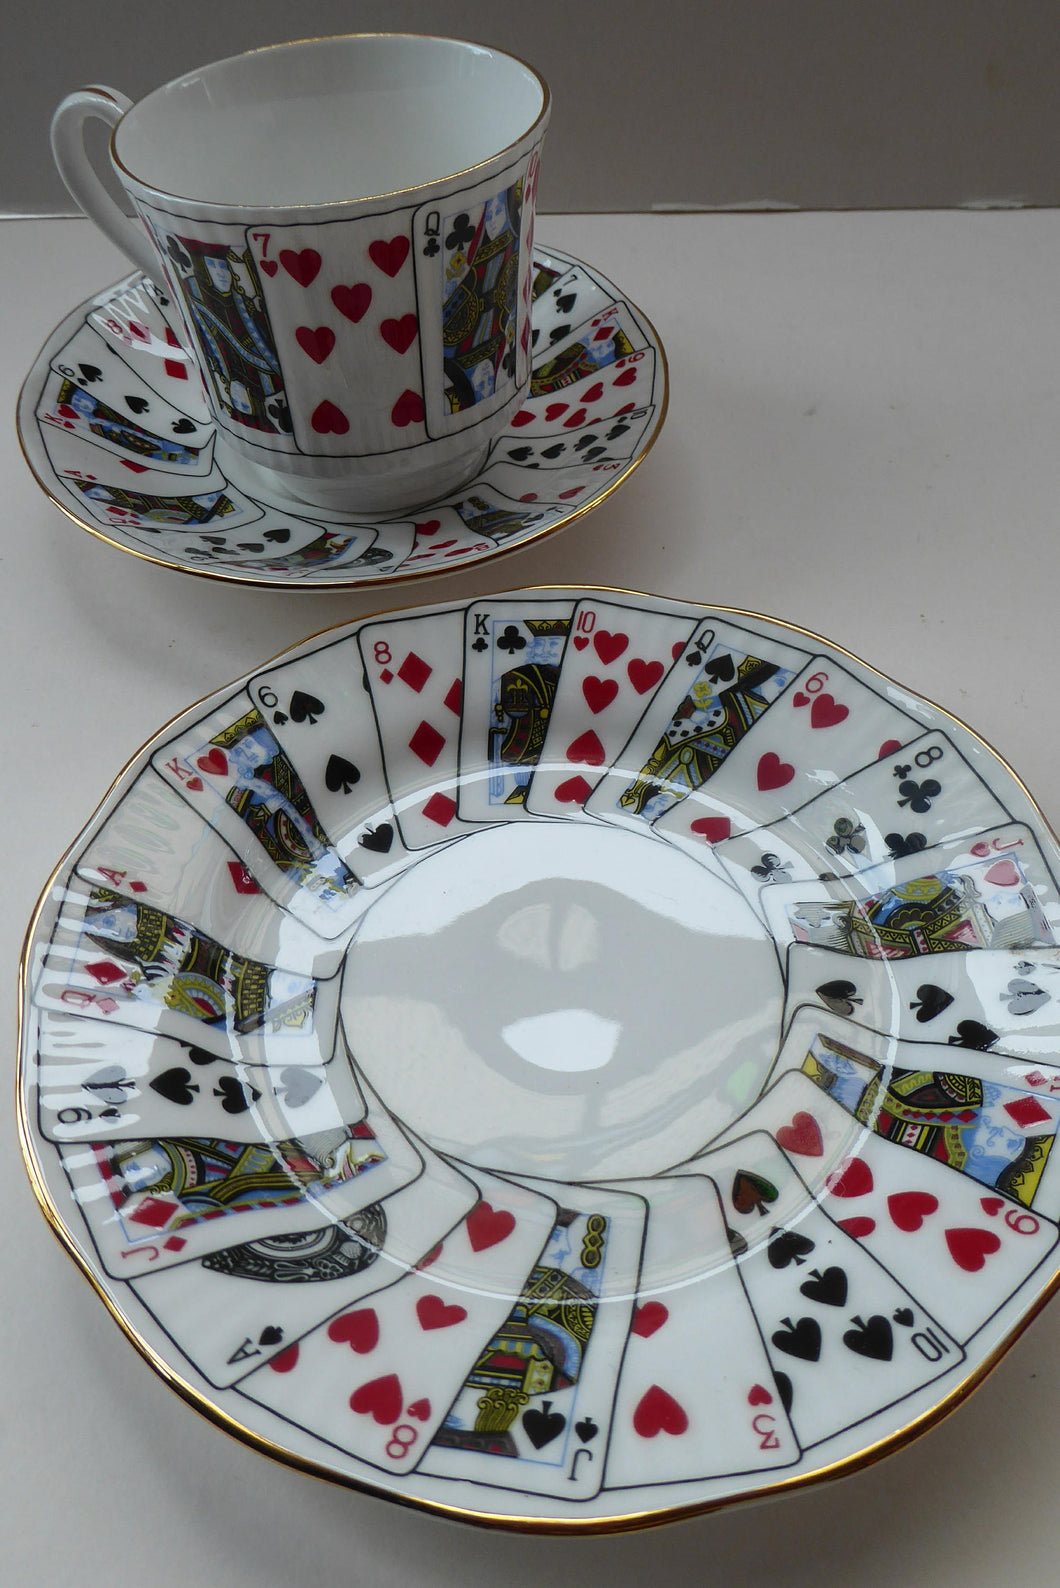 ELIZABETHAN Cut for Coffee Pattern. Cute Vintage Bone China Trio: Tea Cup, Saucer & Side Plate. Playing Cards Decoration.